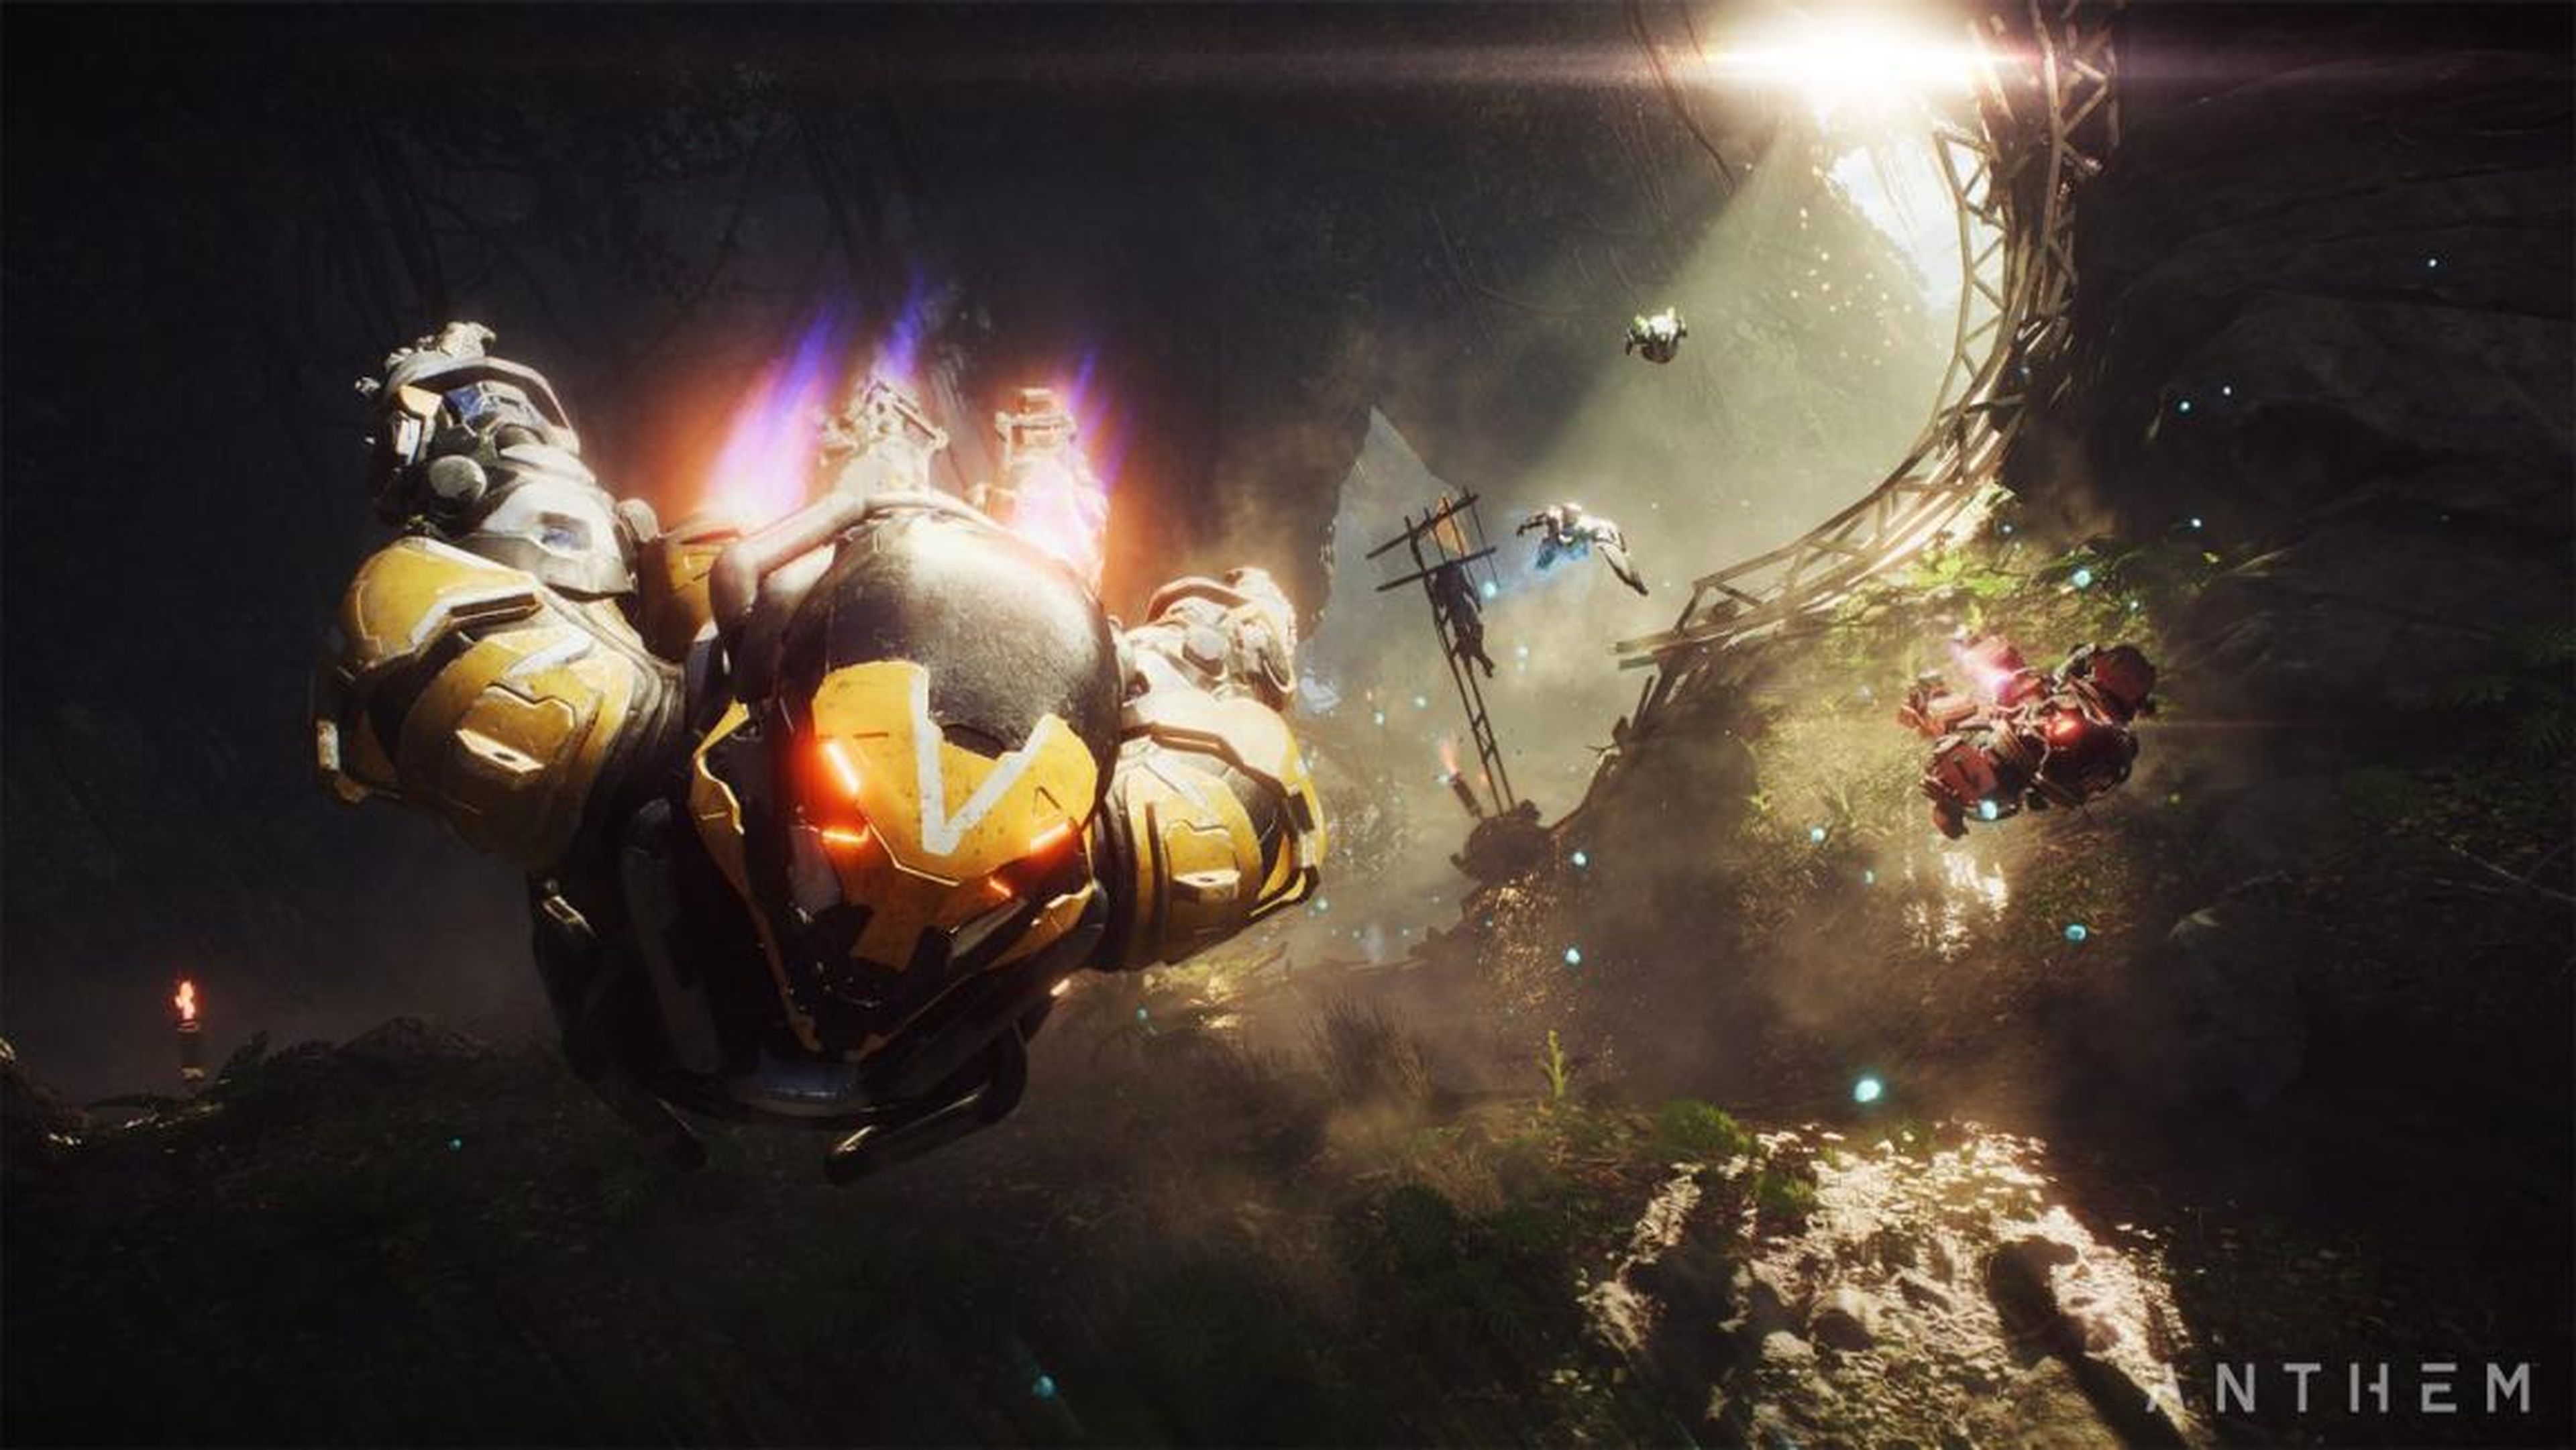 The huge new game from the folks behind the "Mass Effect" franchise, named "Anthem," was the biggest video game flop in years.